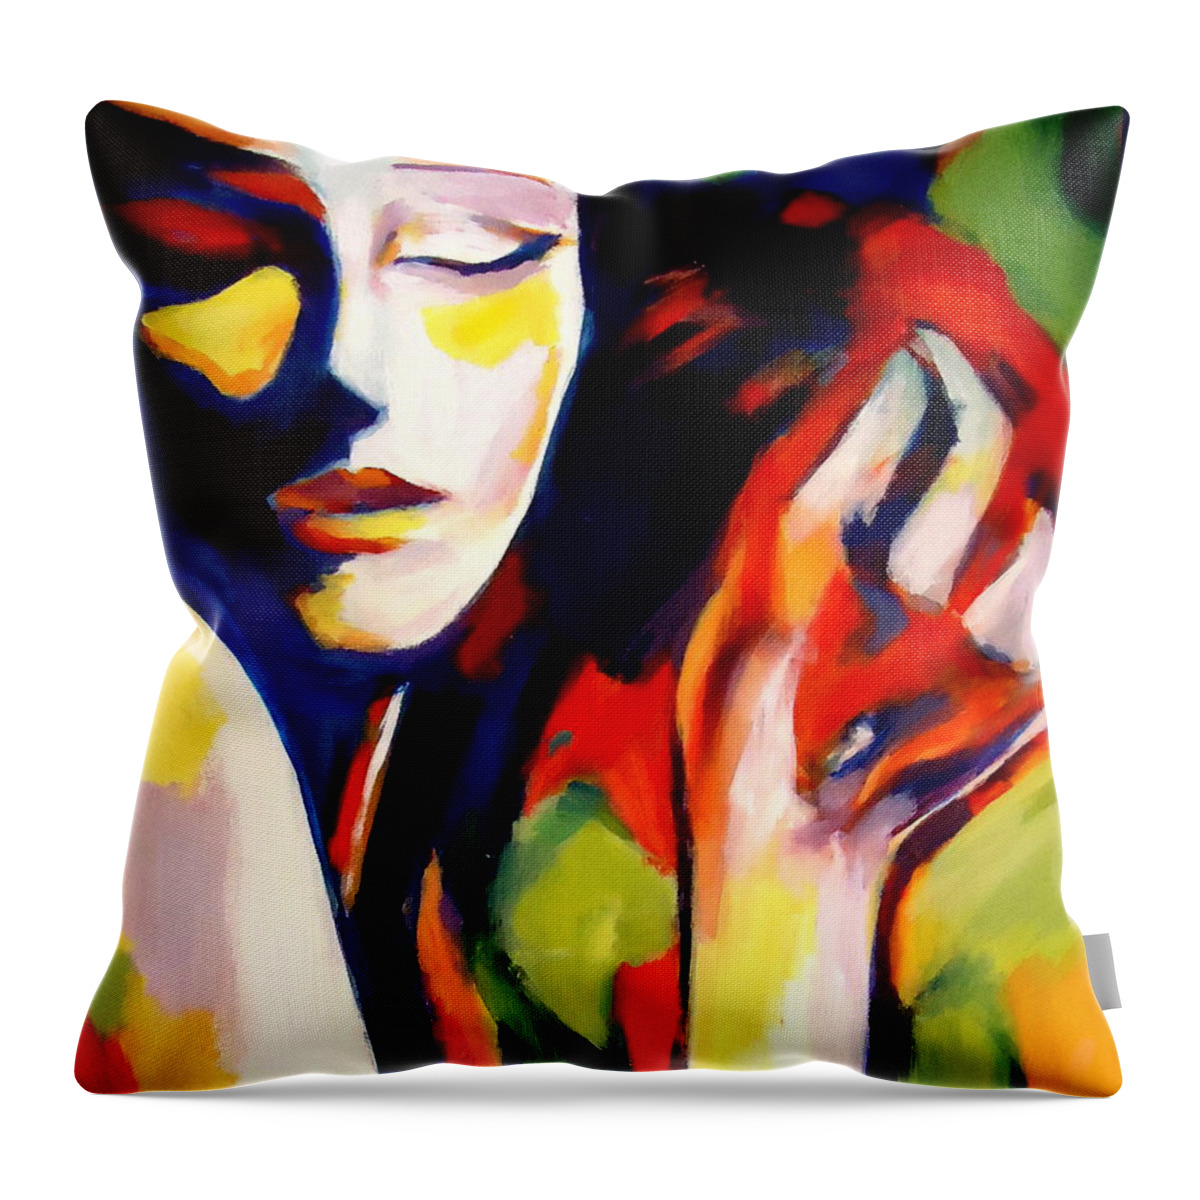 Nude Figures Throw Pillow featuring the painting Tuning by Helena Wierzbicki